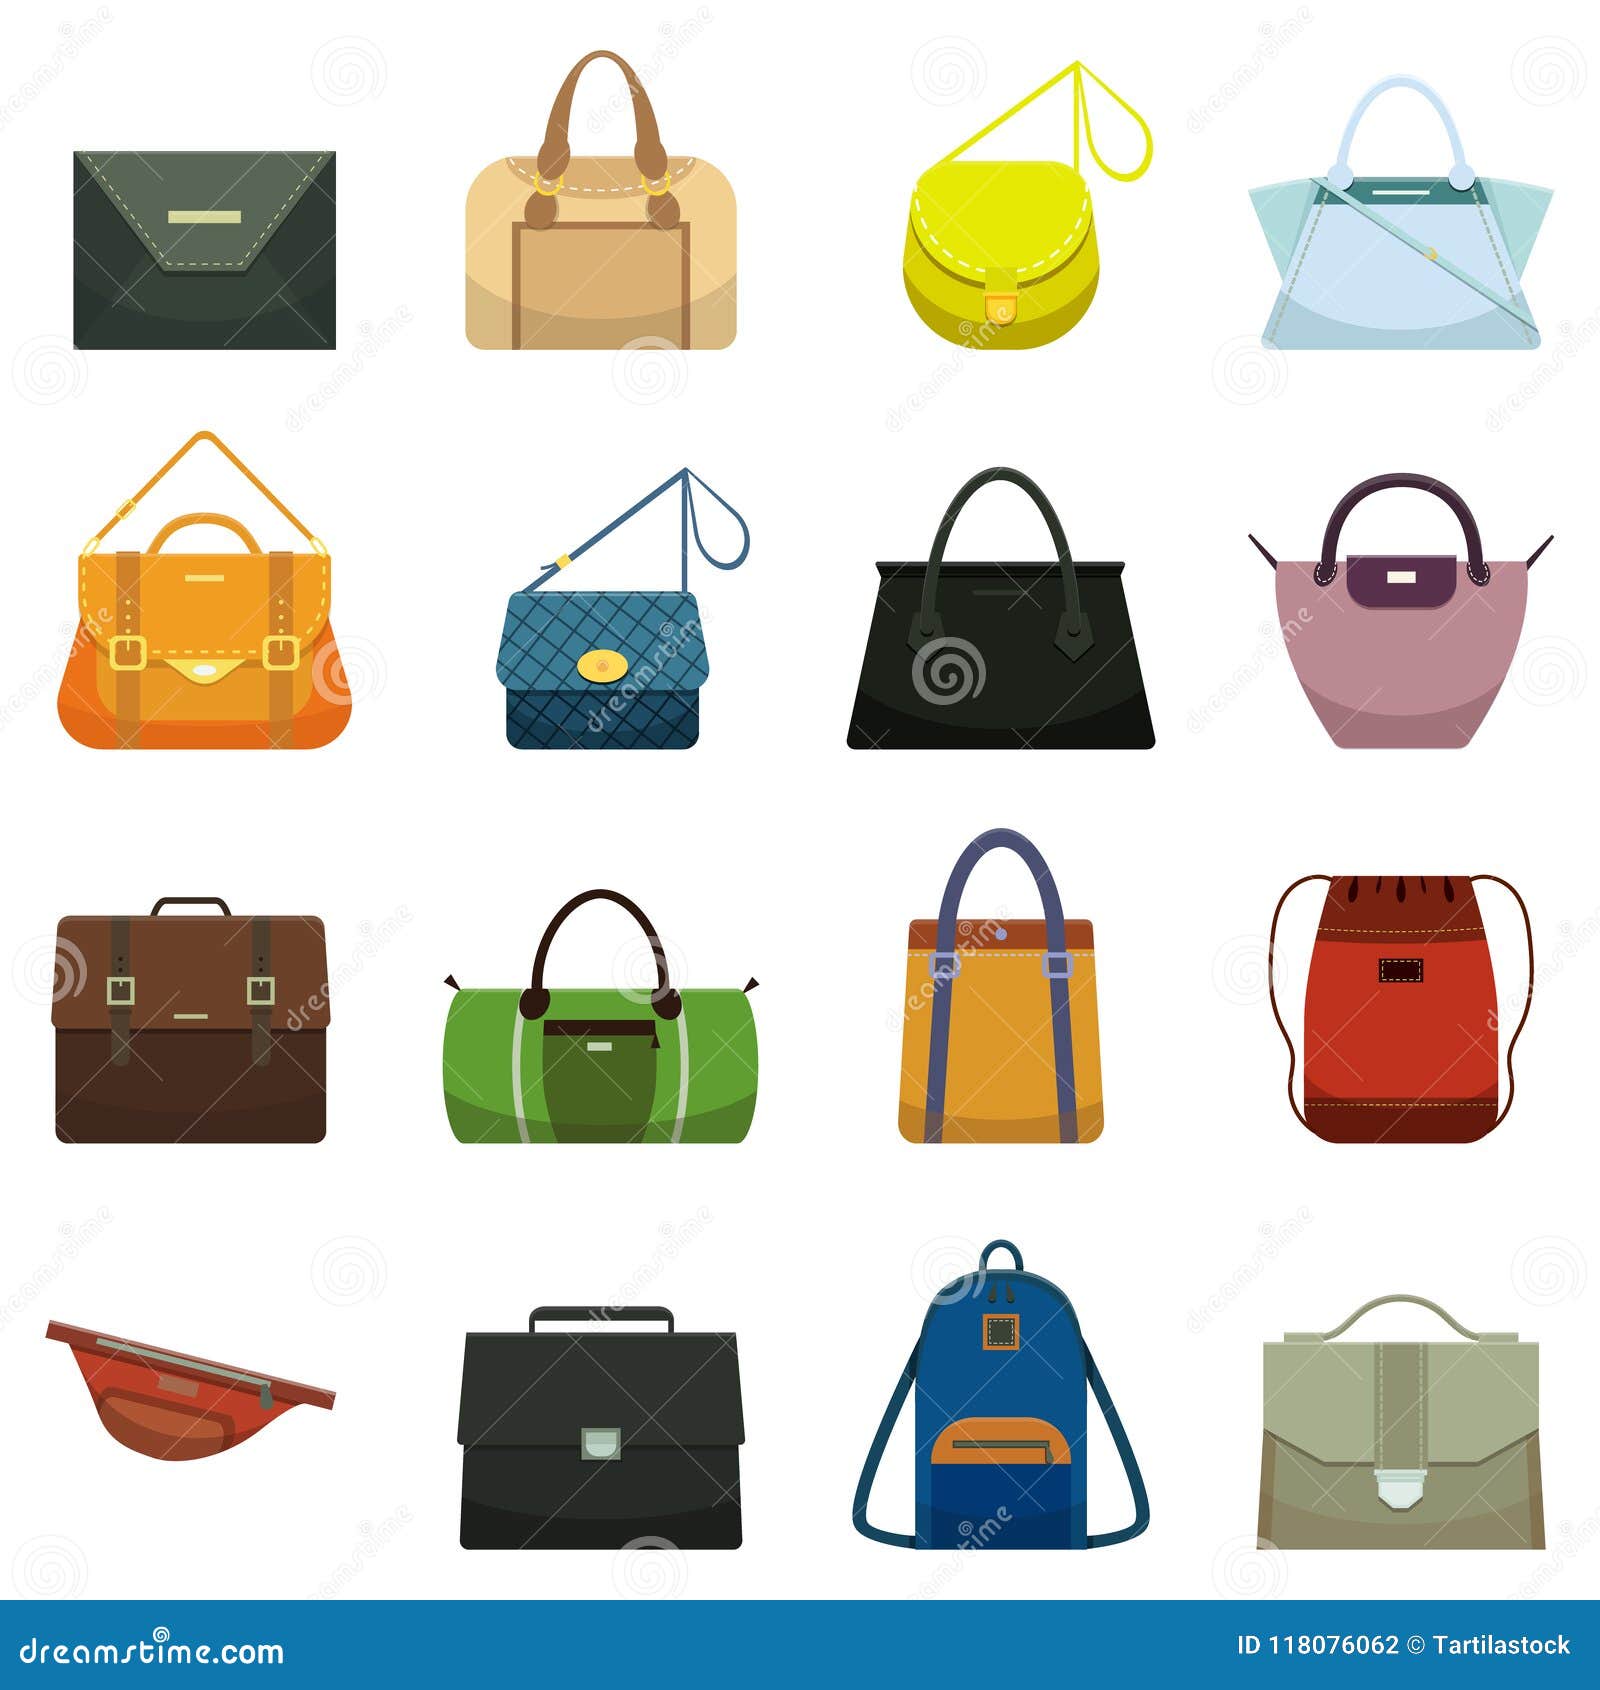 female leather handbags and male accessory. colorful handbag accessories, beauty bags and purse model collection 